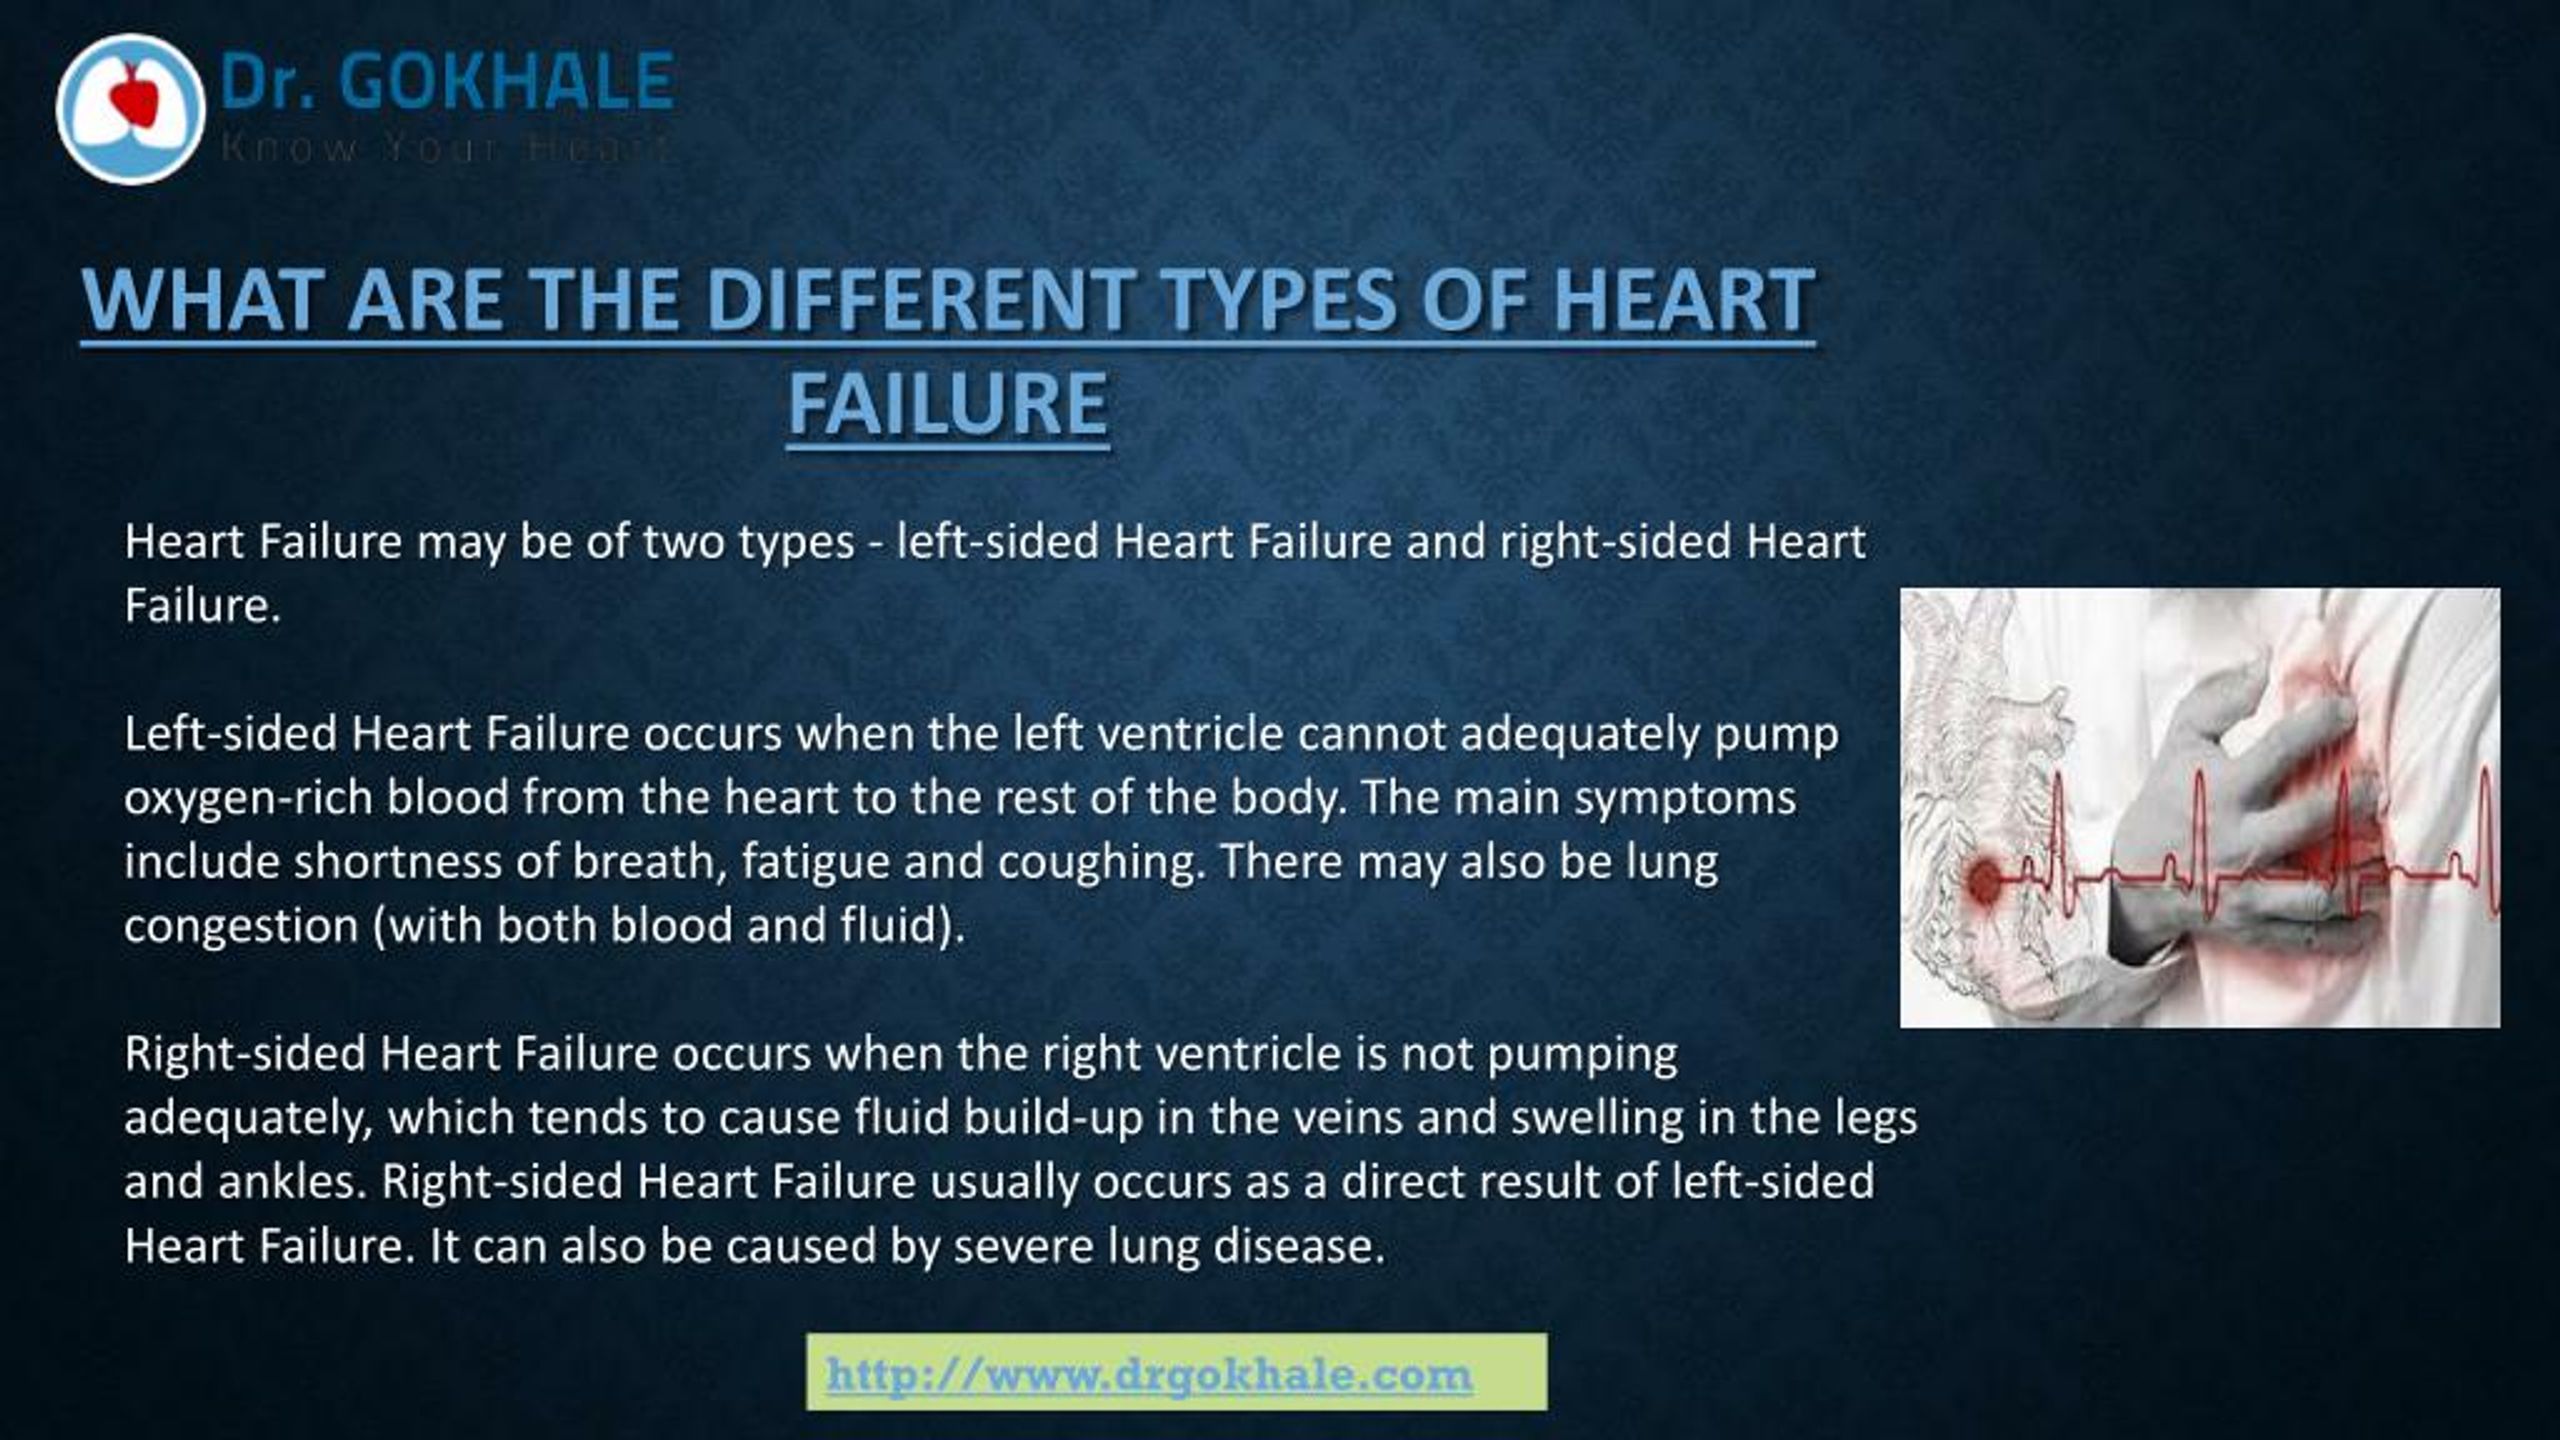 PPT Heart Failure Introduction Causes And Treatment By Dr Gokhale